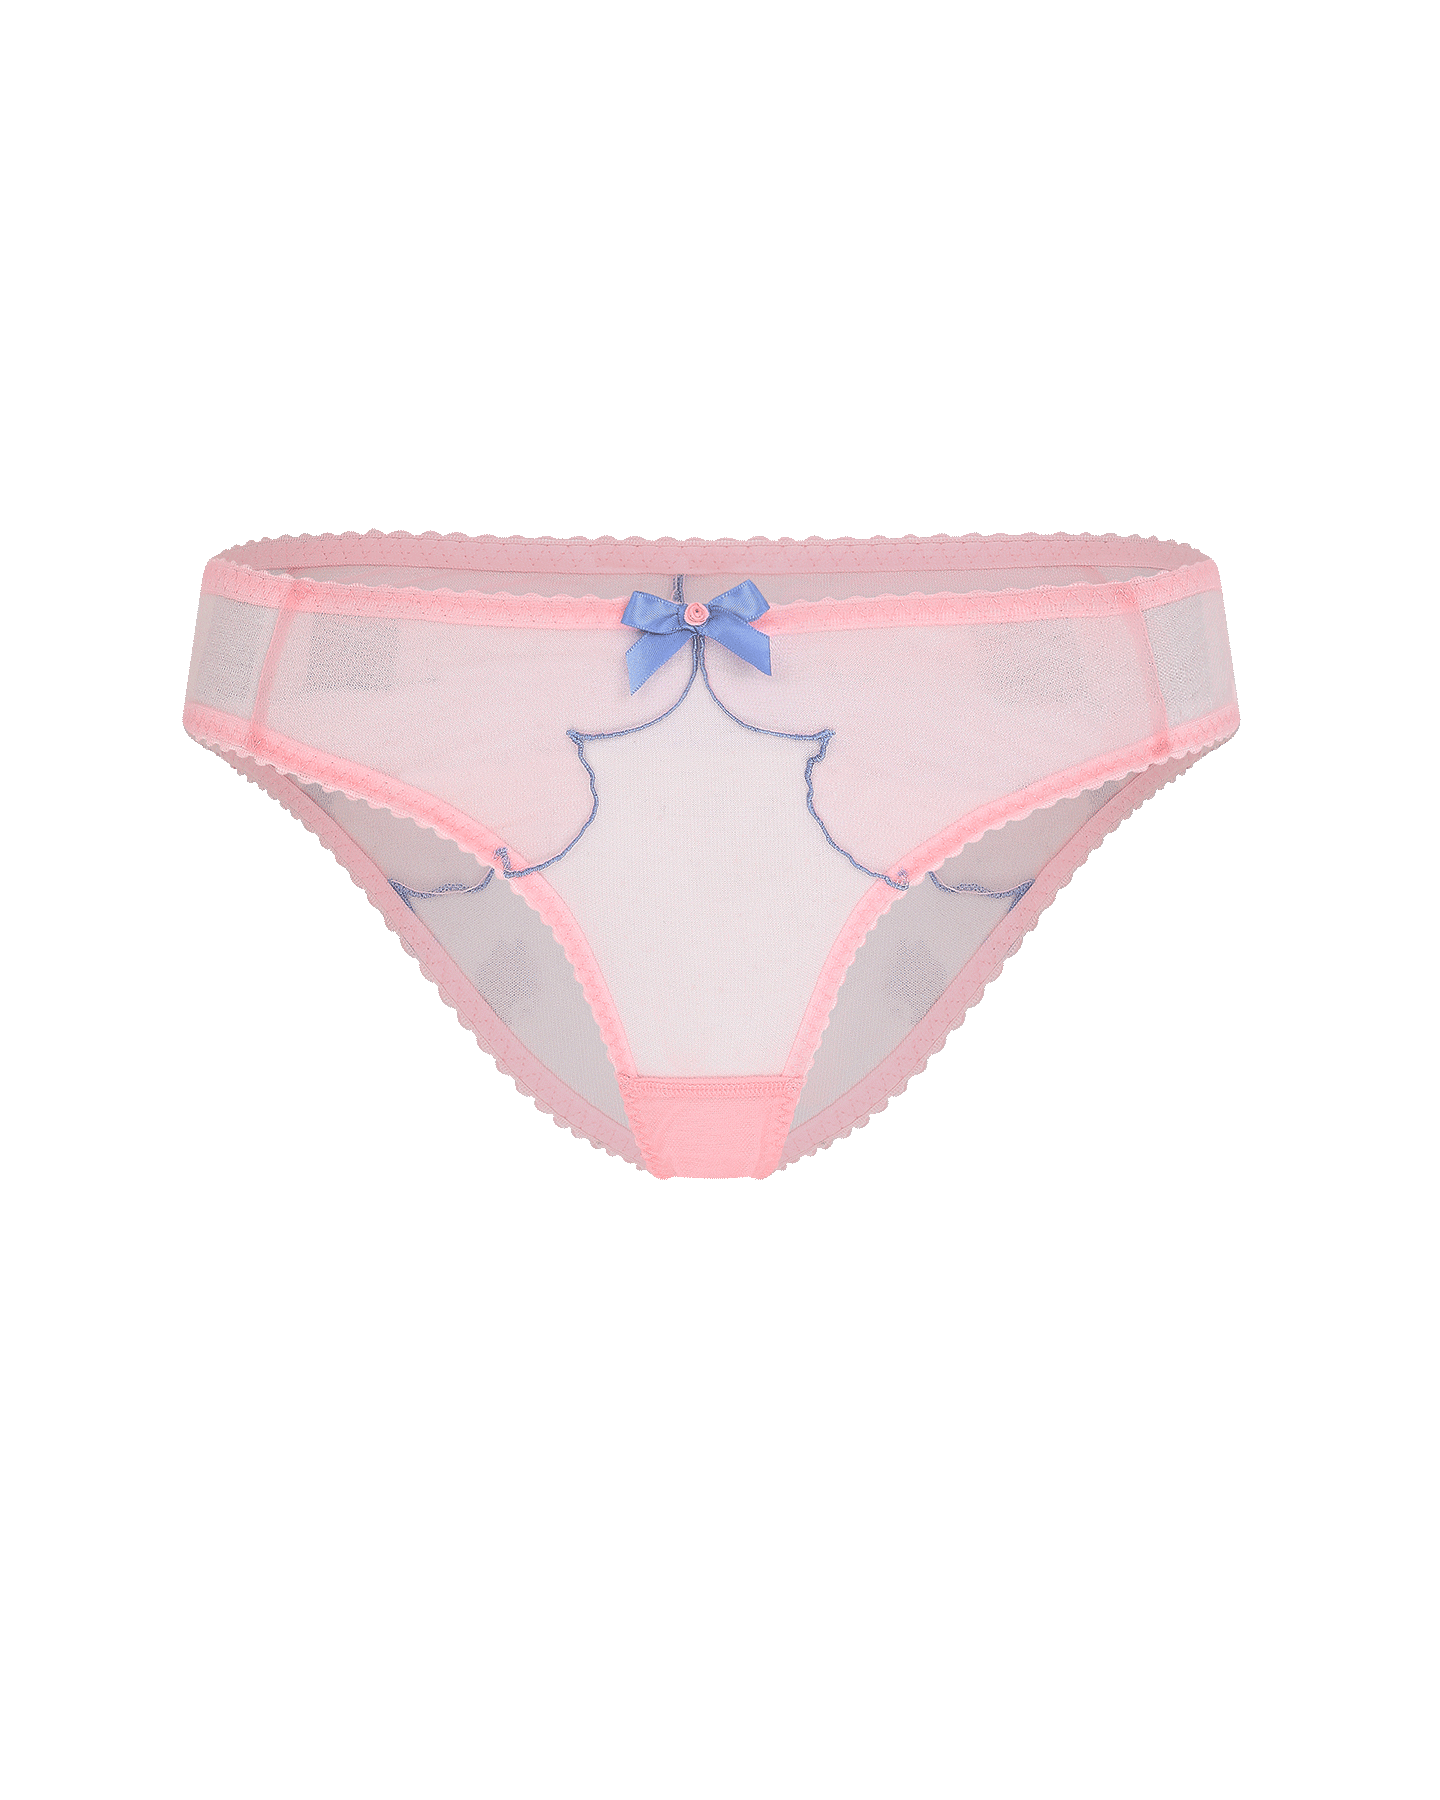 Lorna Full Brief in Baby Pink/Blue | By Agent Provocateur New In